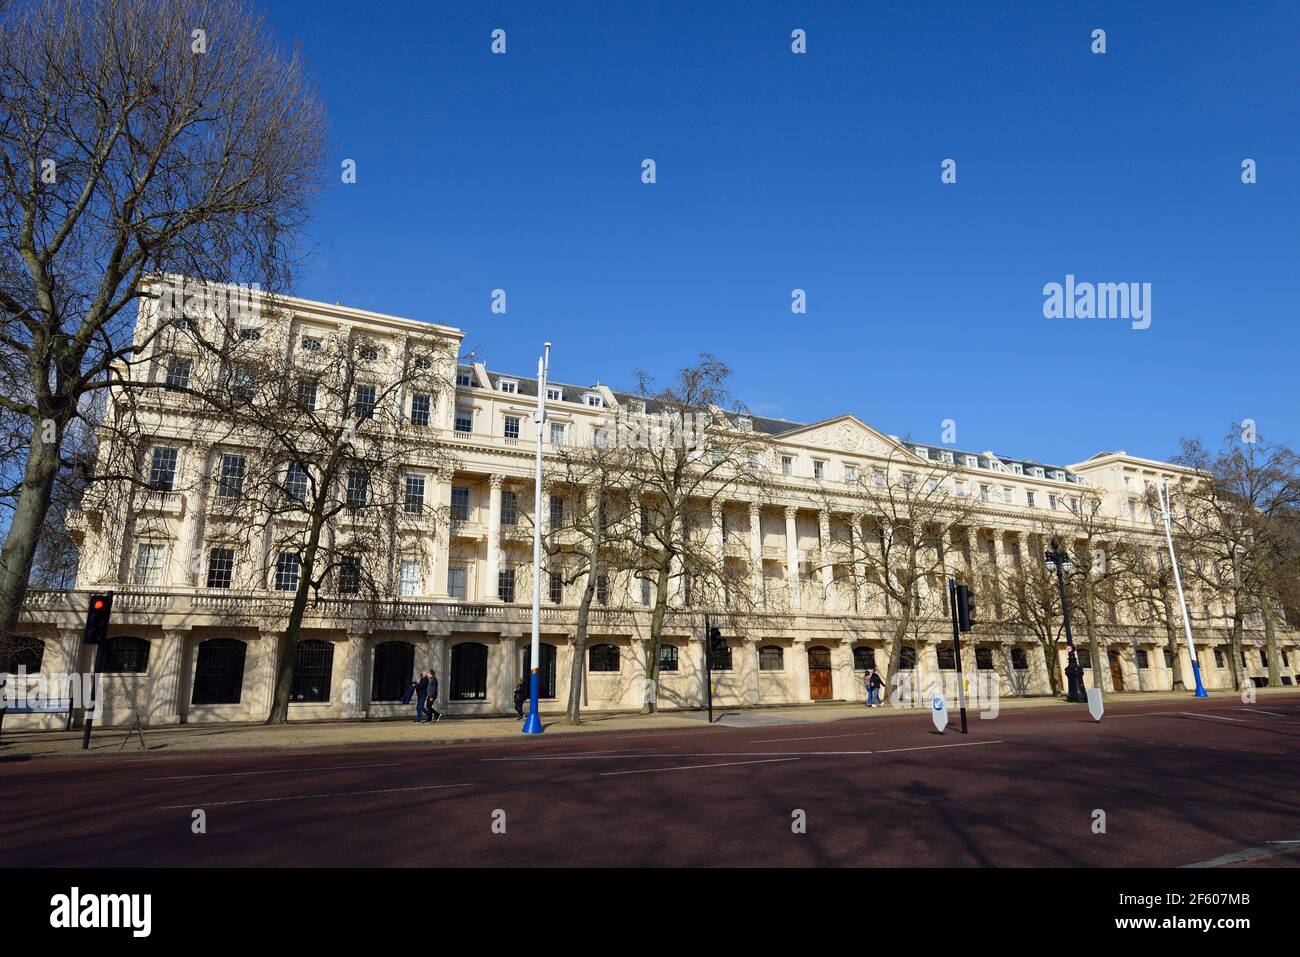 Carlton House Terrace, Institute of Contemporary Arts (ICA), The Mall, St. James's, Londres, Royaume-Uni Banque D'Images